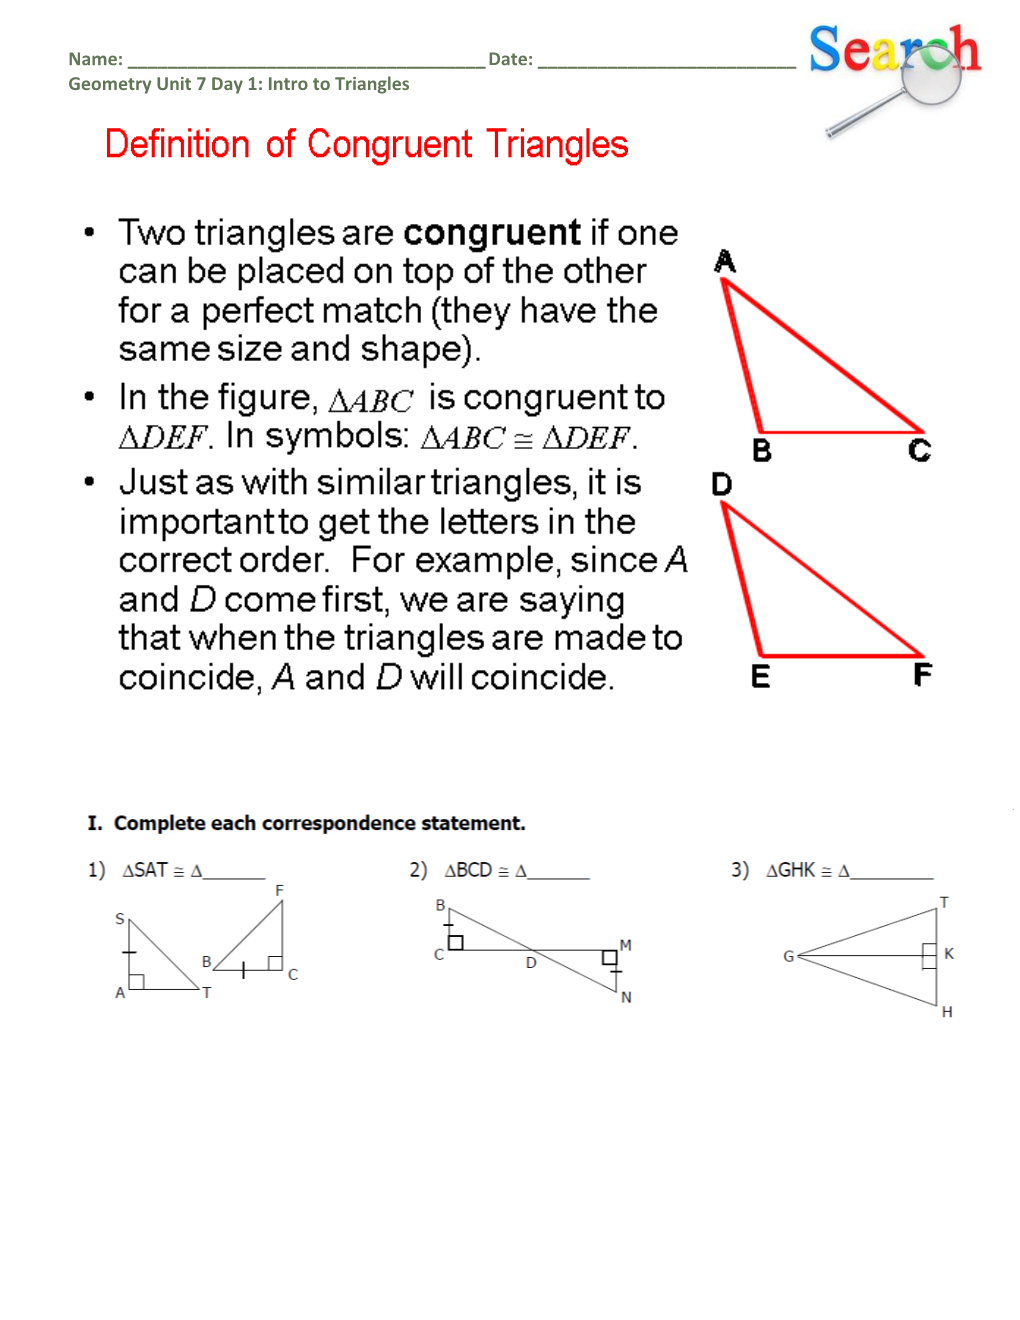 Geometry Unit 7 Day 1: Intro to Triangles